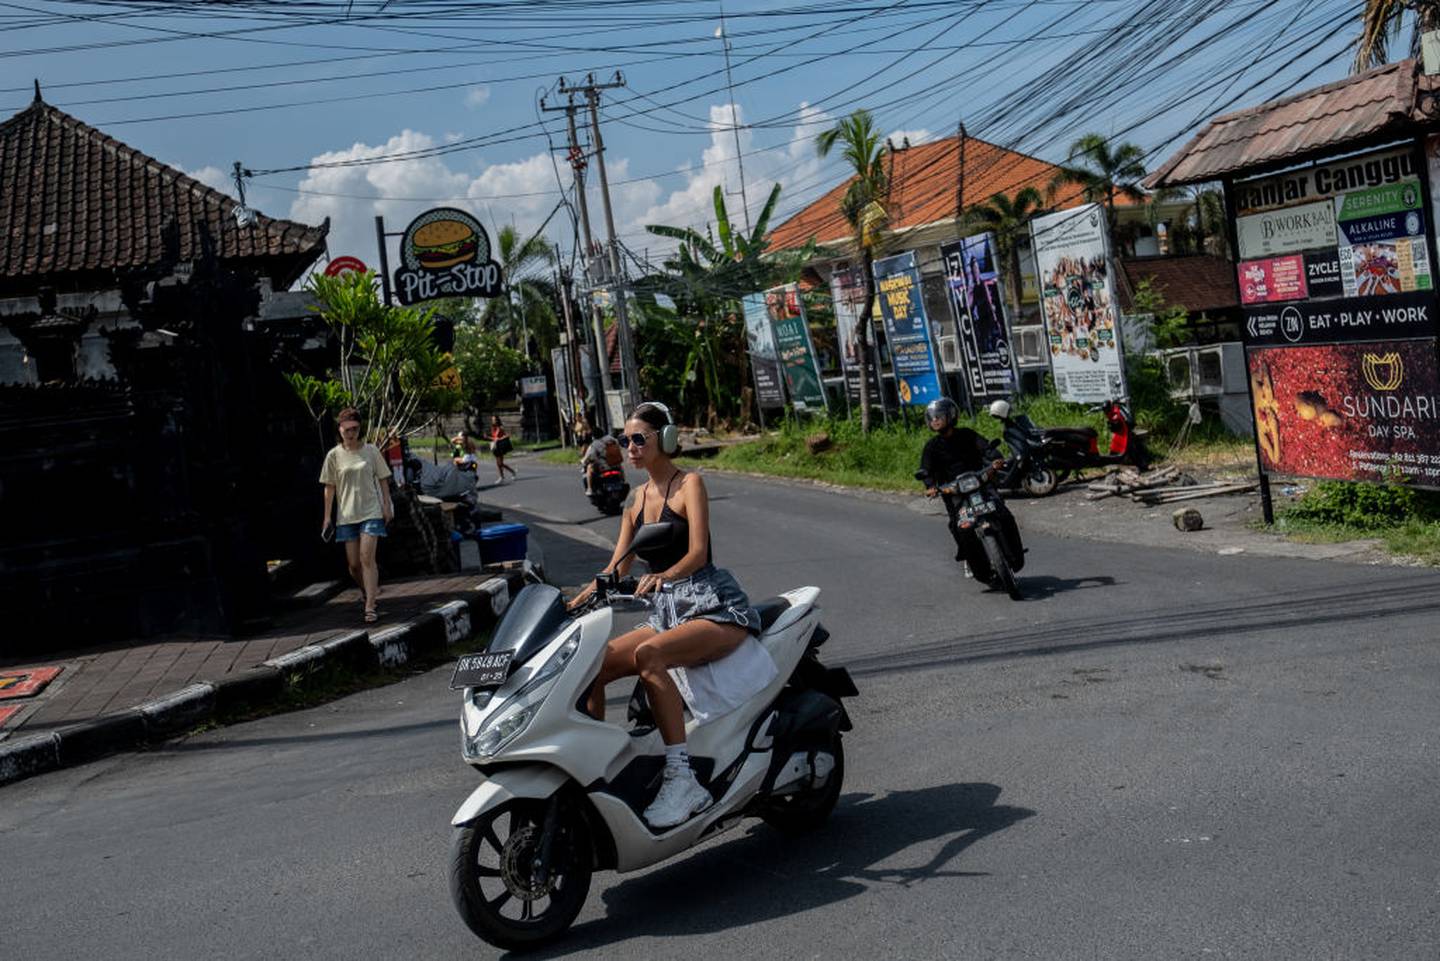 Bali leaders and authorities are sick of tourists not obeying their laws and local customs, such as riding a motorcycle without helmet. Photo / Agunng Parameswara, Getty Images